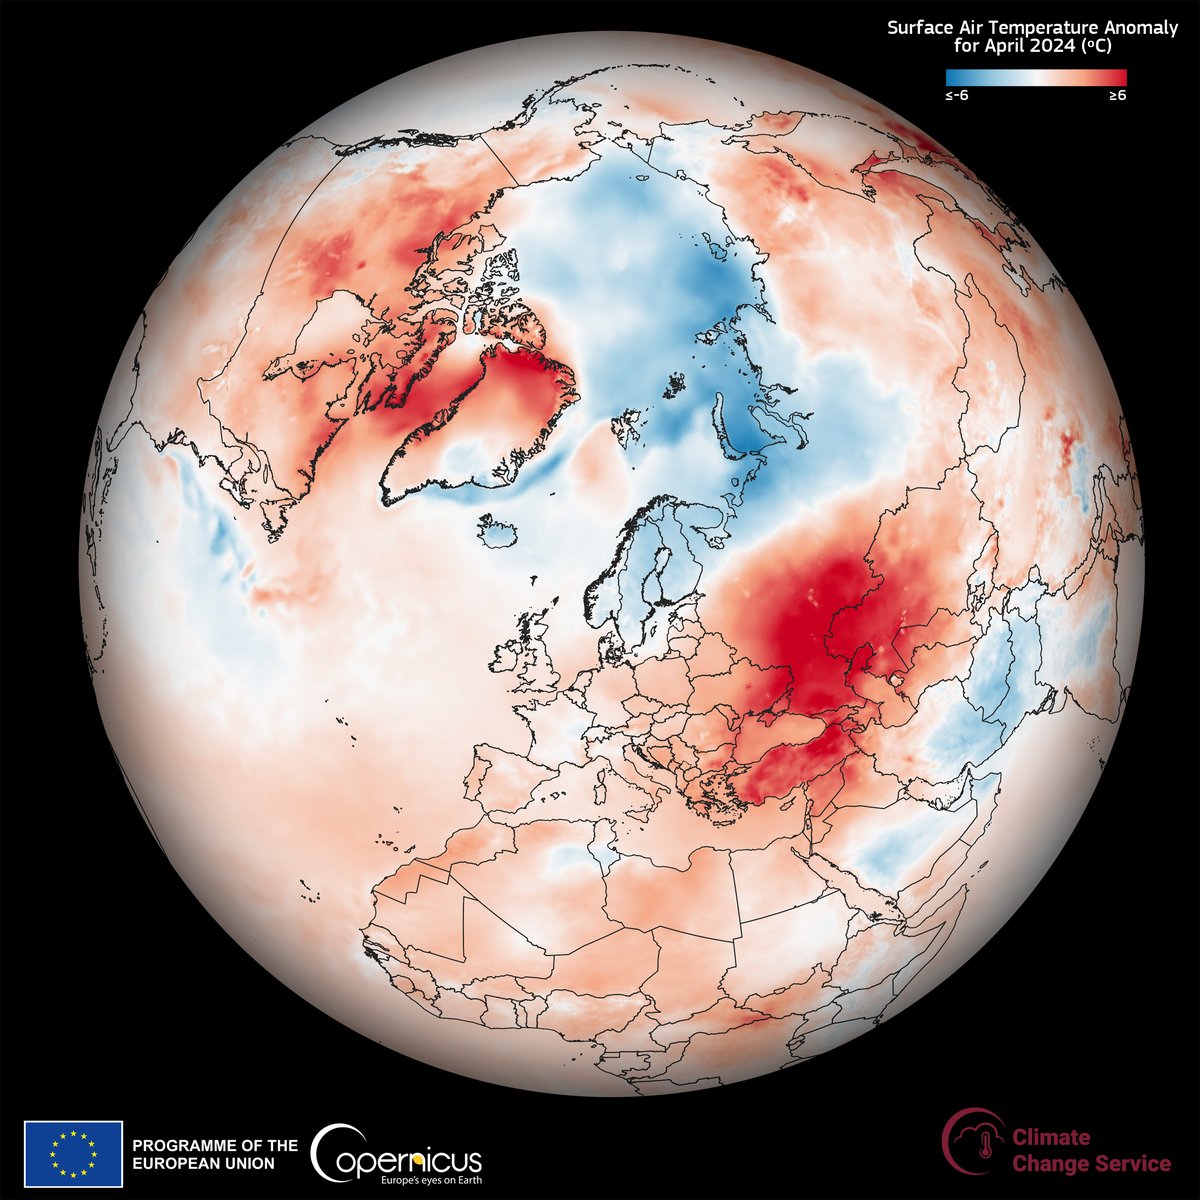 #Copernicus for #ClimateChange awareness According to the latest monthly climate bulletin of our #CopernicusClimate Change Service: 📈The average European temperature for April 2024 was 1.49°C above the 1991-2020 average Read more 👇 climate.copernicus.eu/surface-air-te…